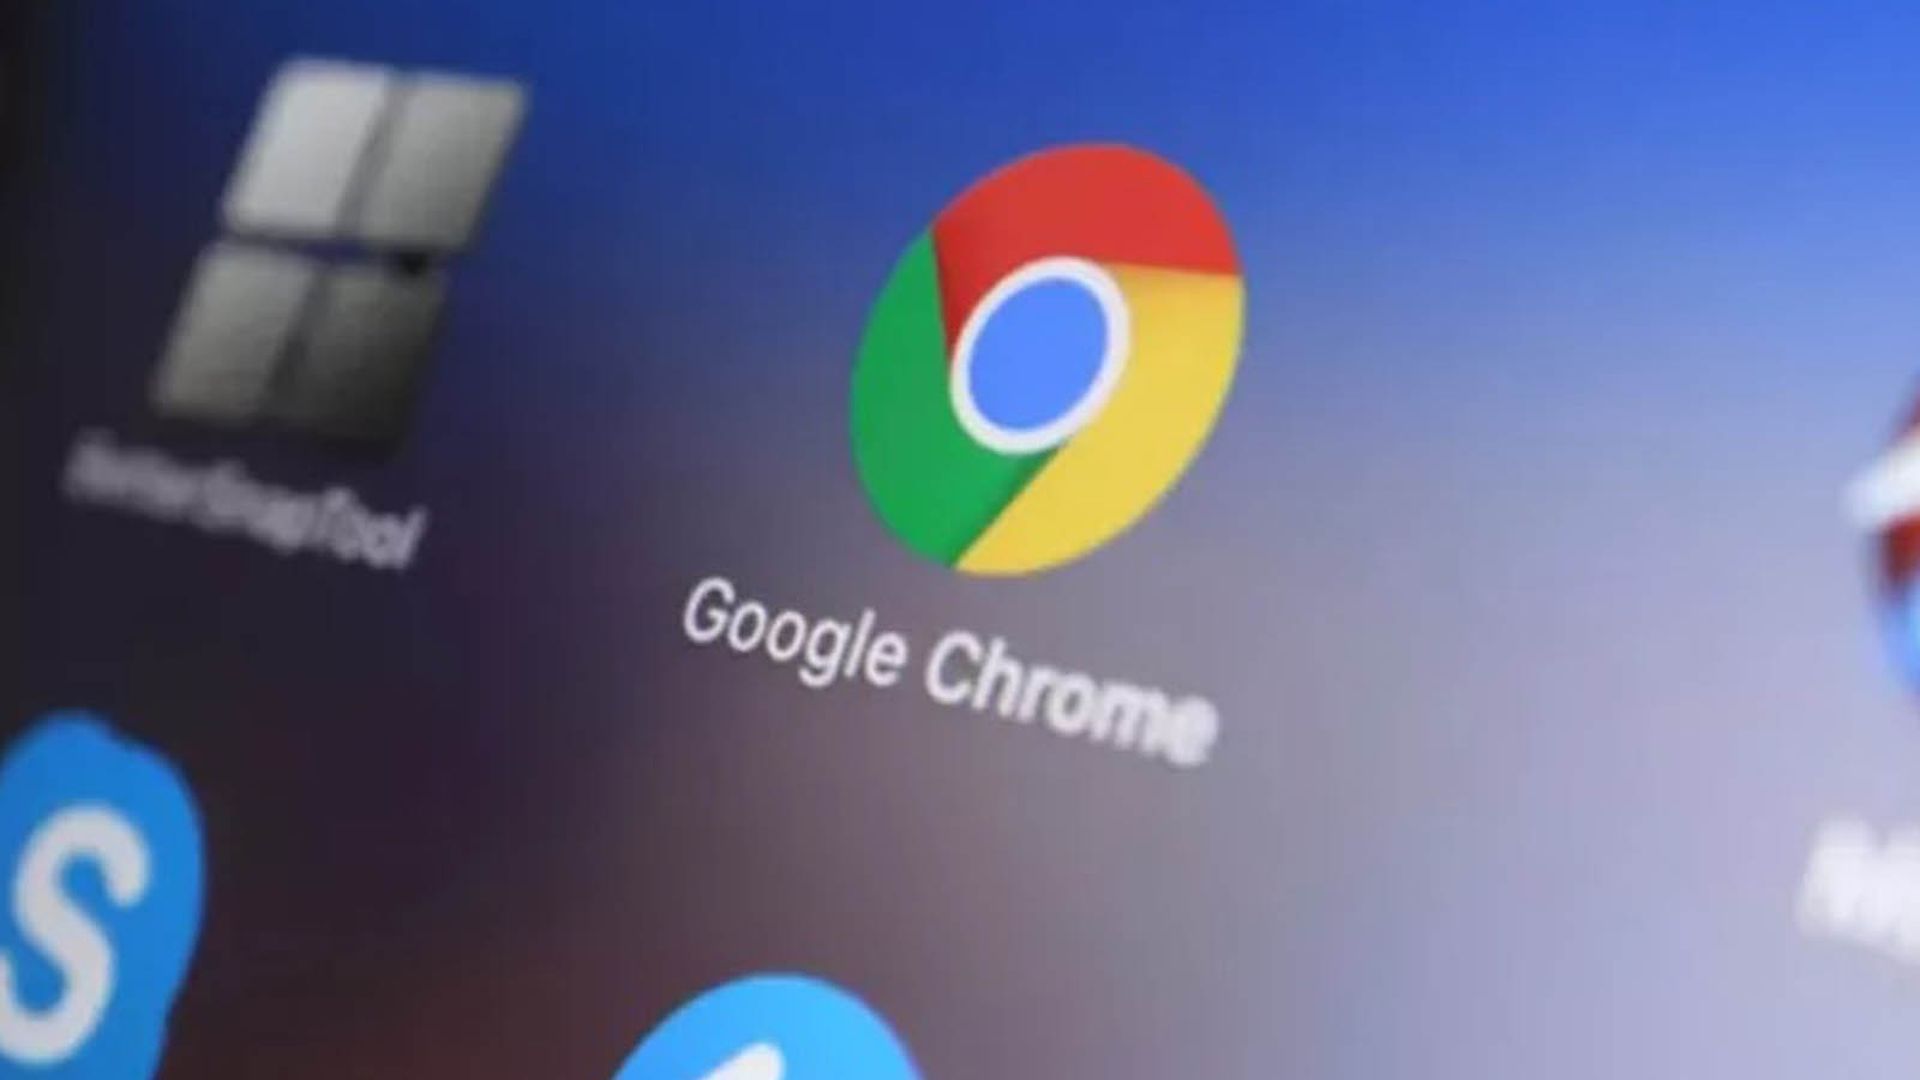 There is a new Google Chrome bug and experts are urging users to update their browser as soon as possible.